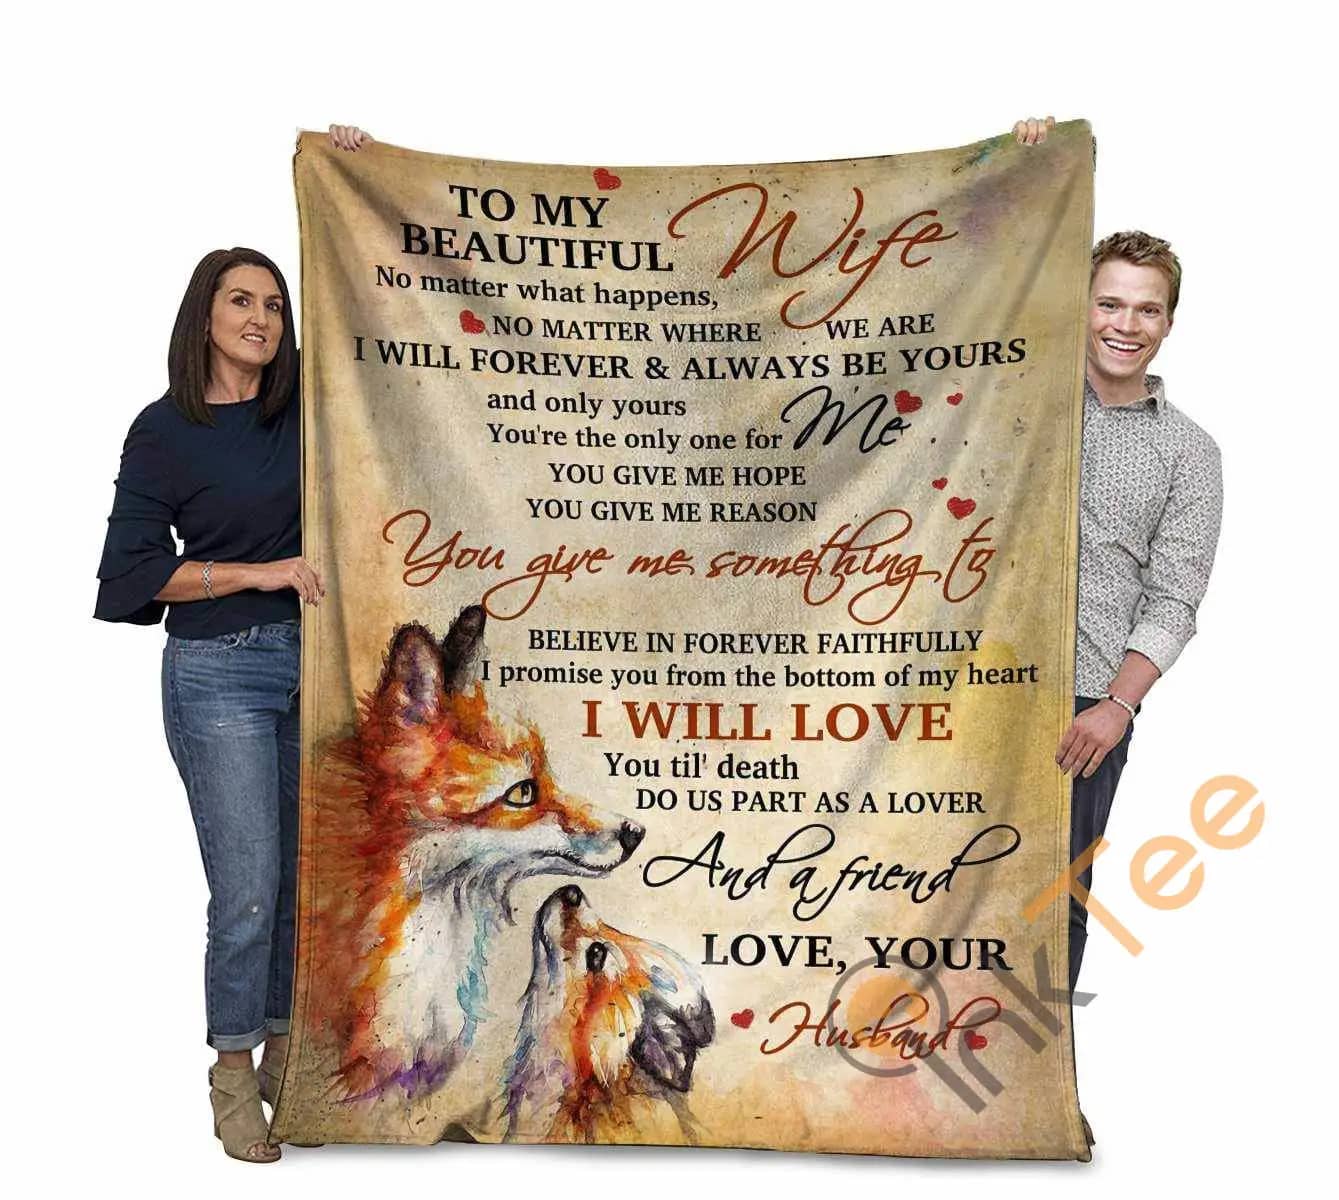 To My Beautiful Wife No Matter What Happens I'll Forever & Always Be Yours Red Fox Ultra Soft Cozy Plush Fleece Blanket